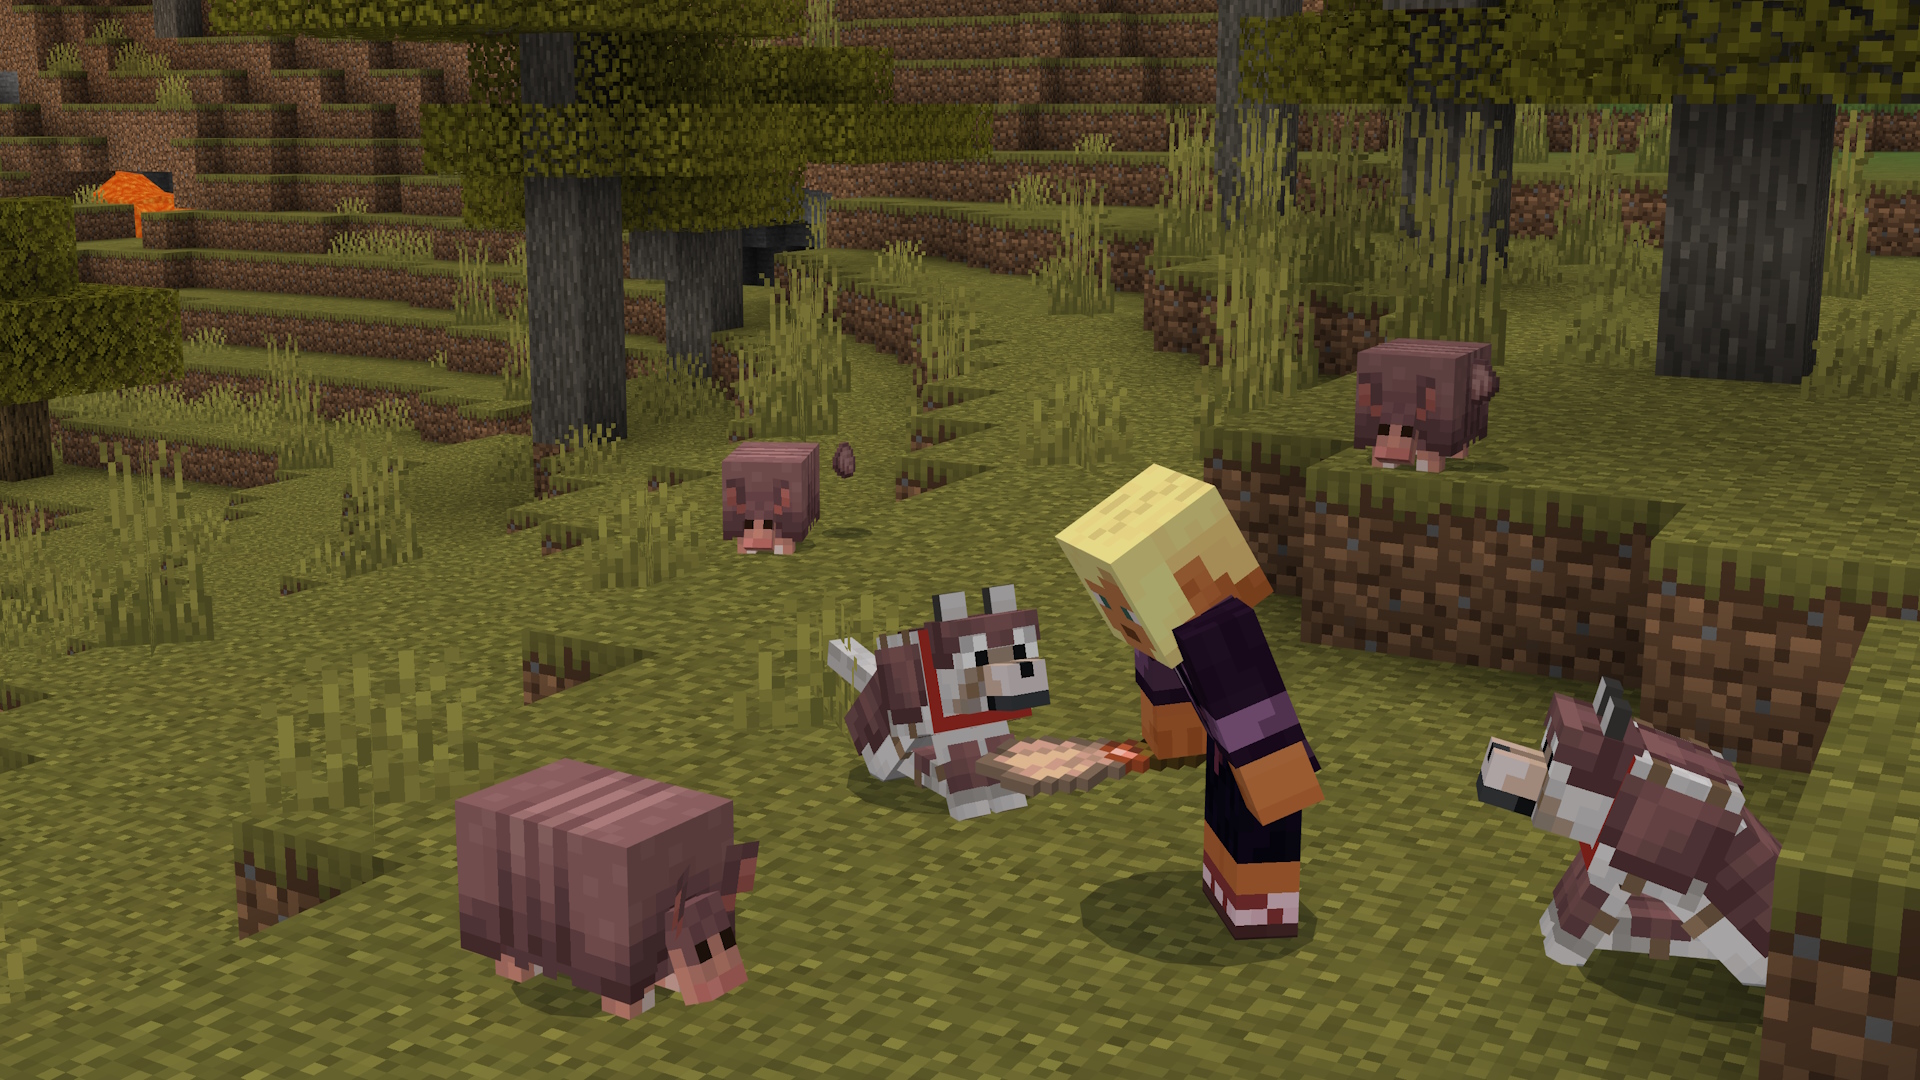 Image of Armadillos and Wolf Armor in Minecraft.